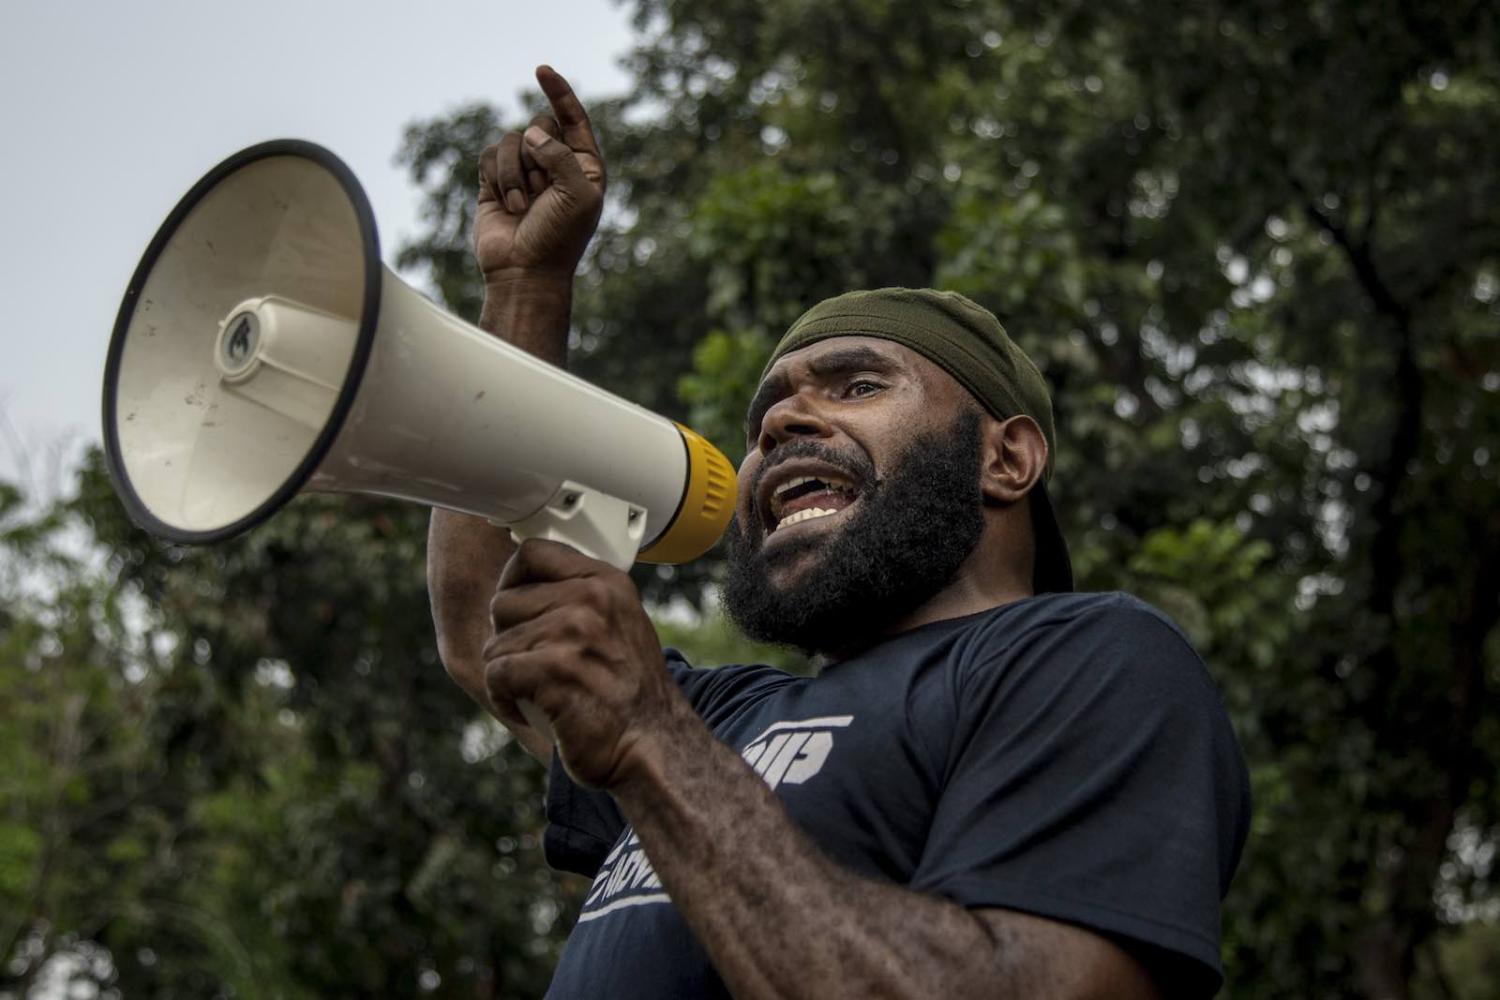 Protest calling for an end to discrimination against the people of Papua, August 2019 in Jakarta (Photo: Mas Agung Wilis/NurPhoto via Getty Images)